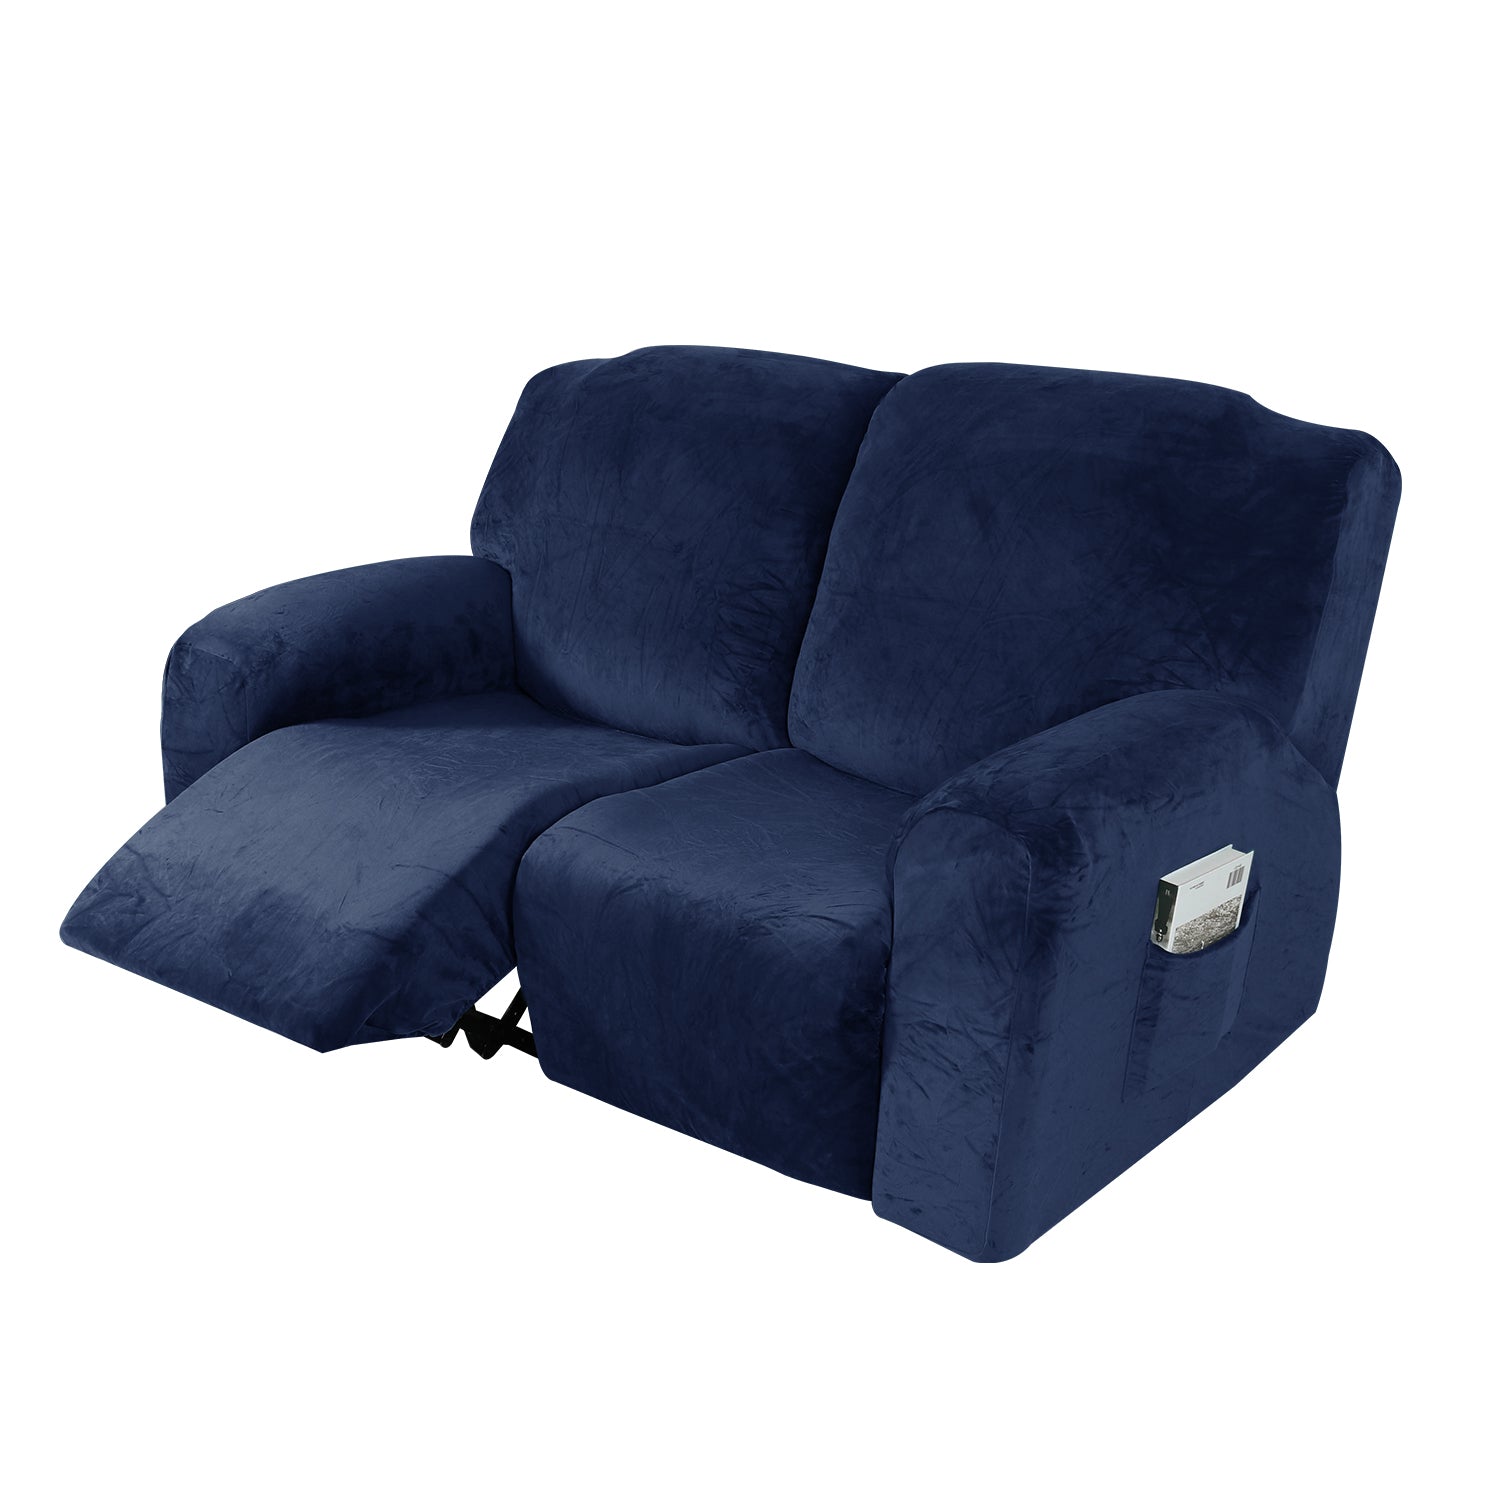 Stretch - Recliner Sofa Slipcover - Furniture Protector - Polyester